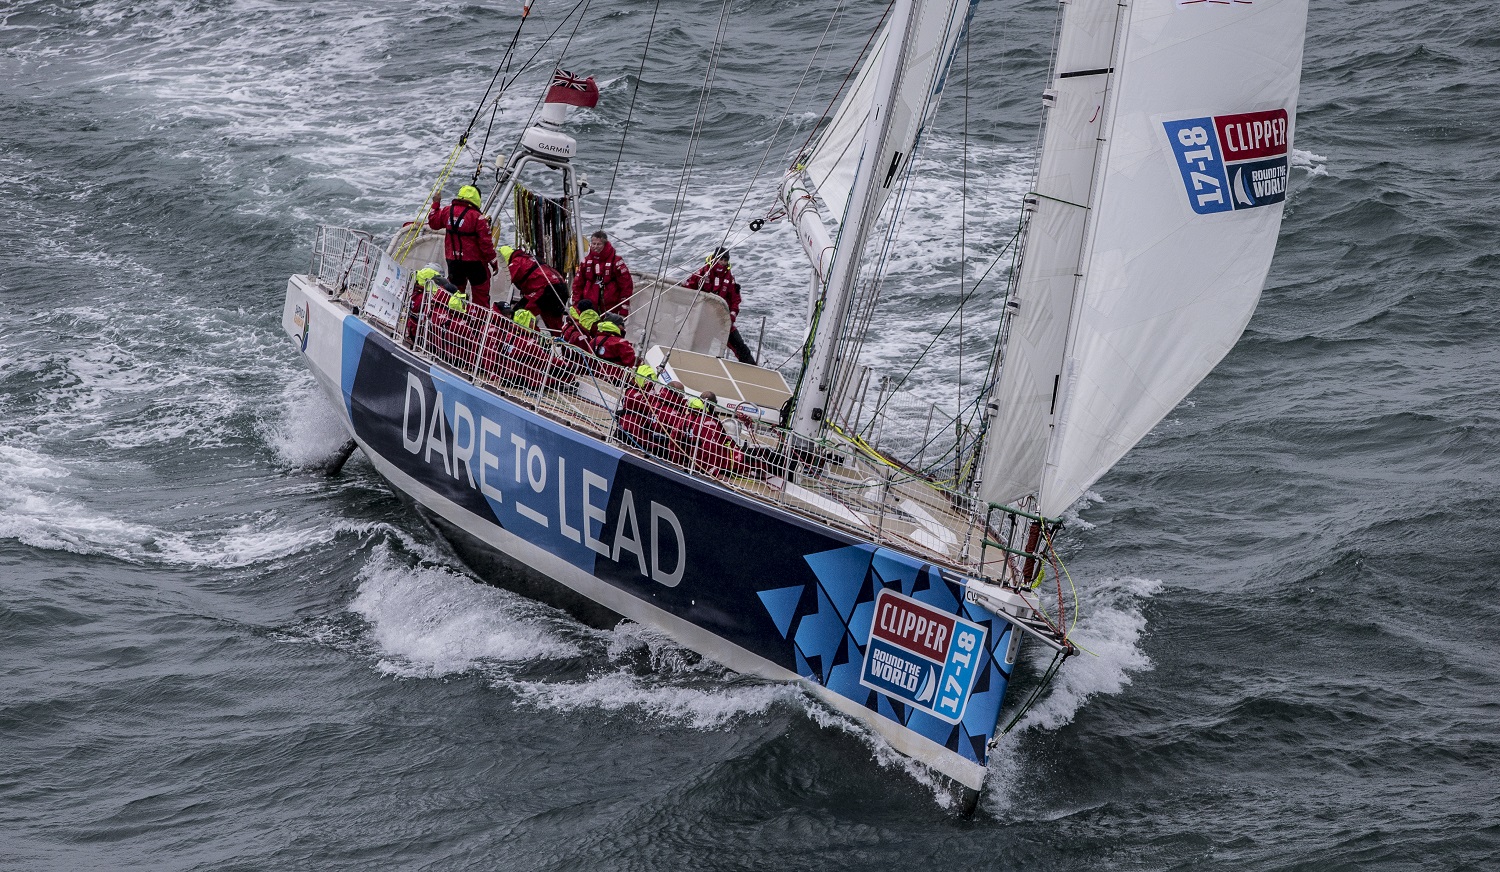 Dare To Lead Steals Maiden Victory in Clipper Race to Panama